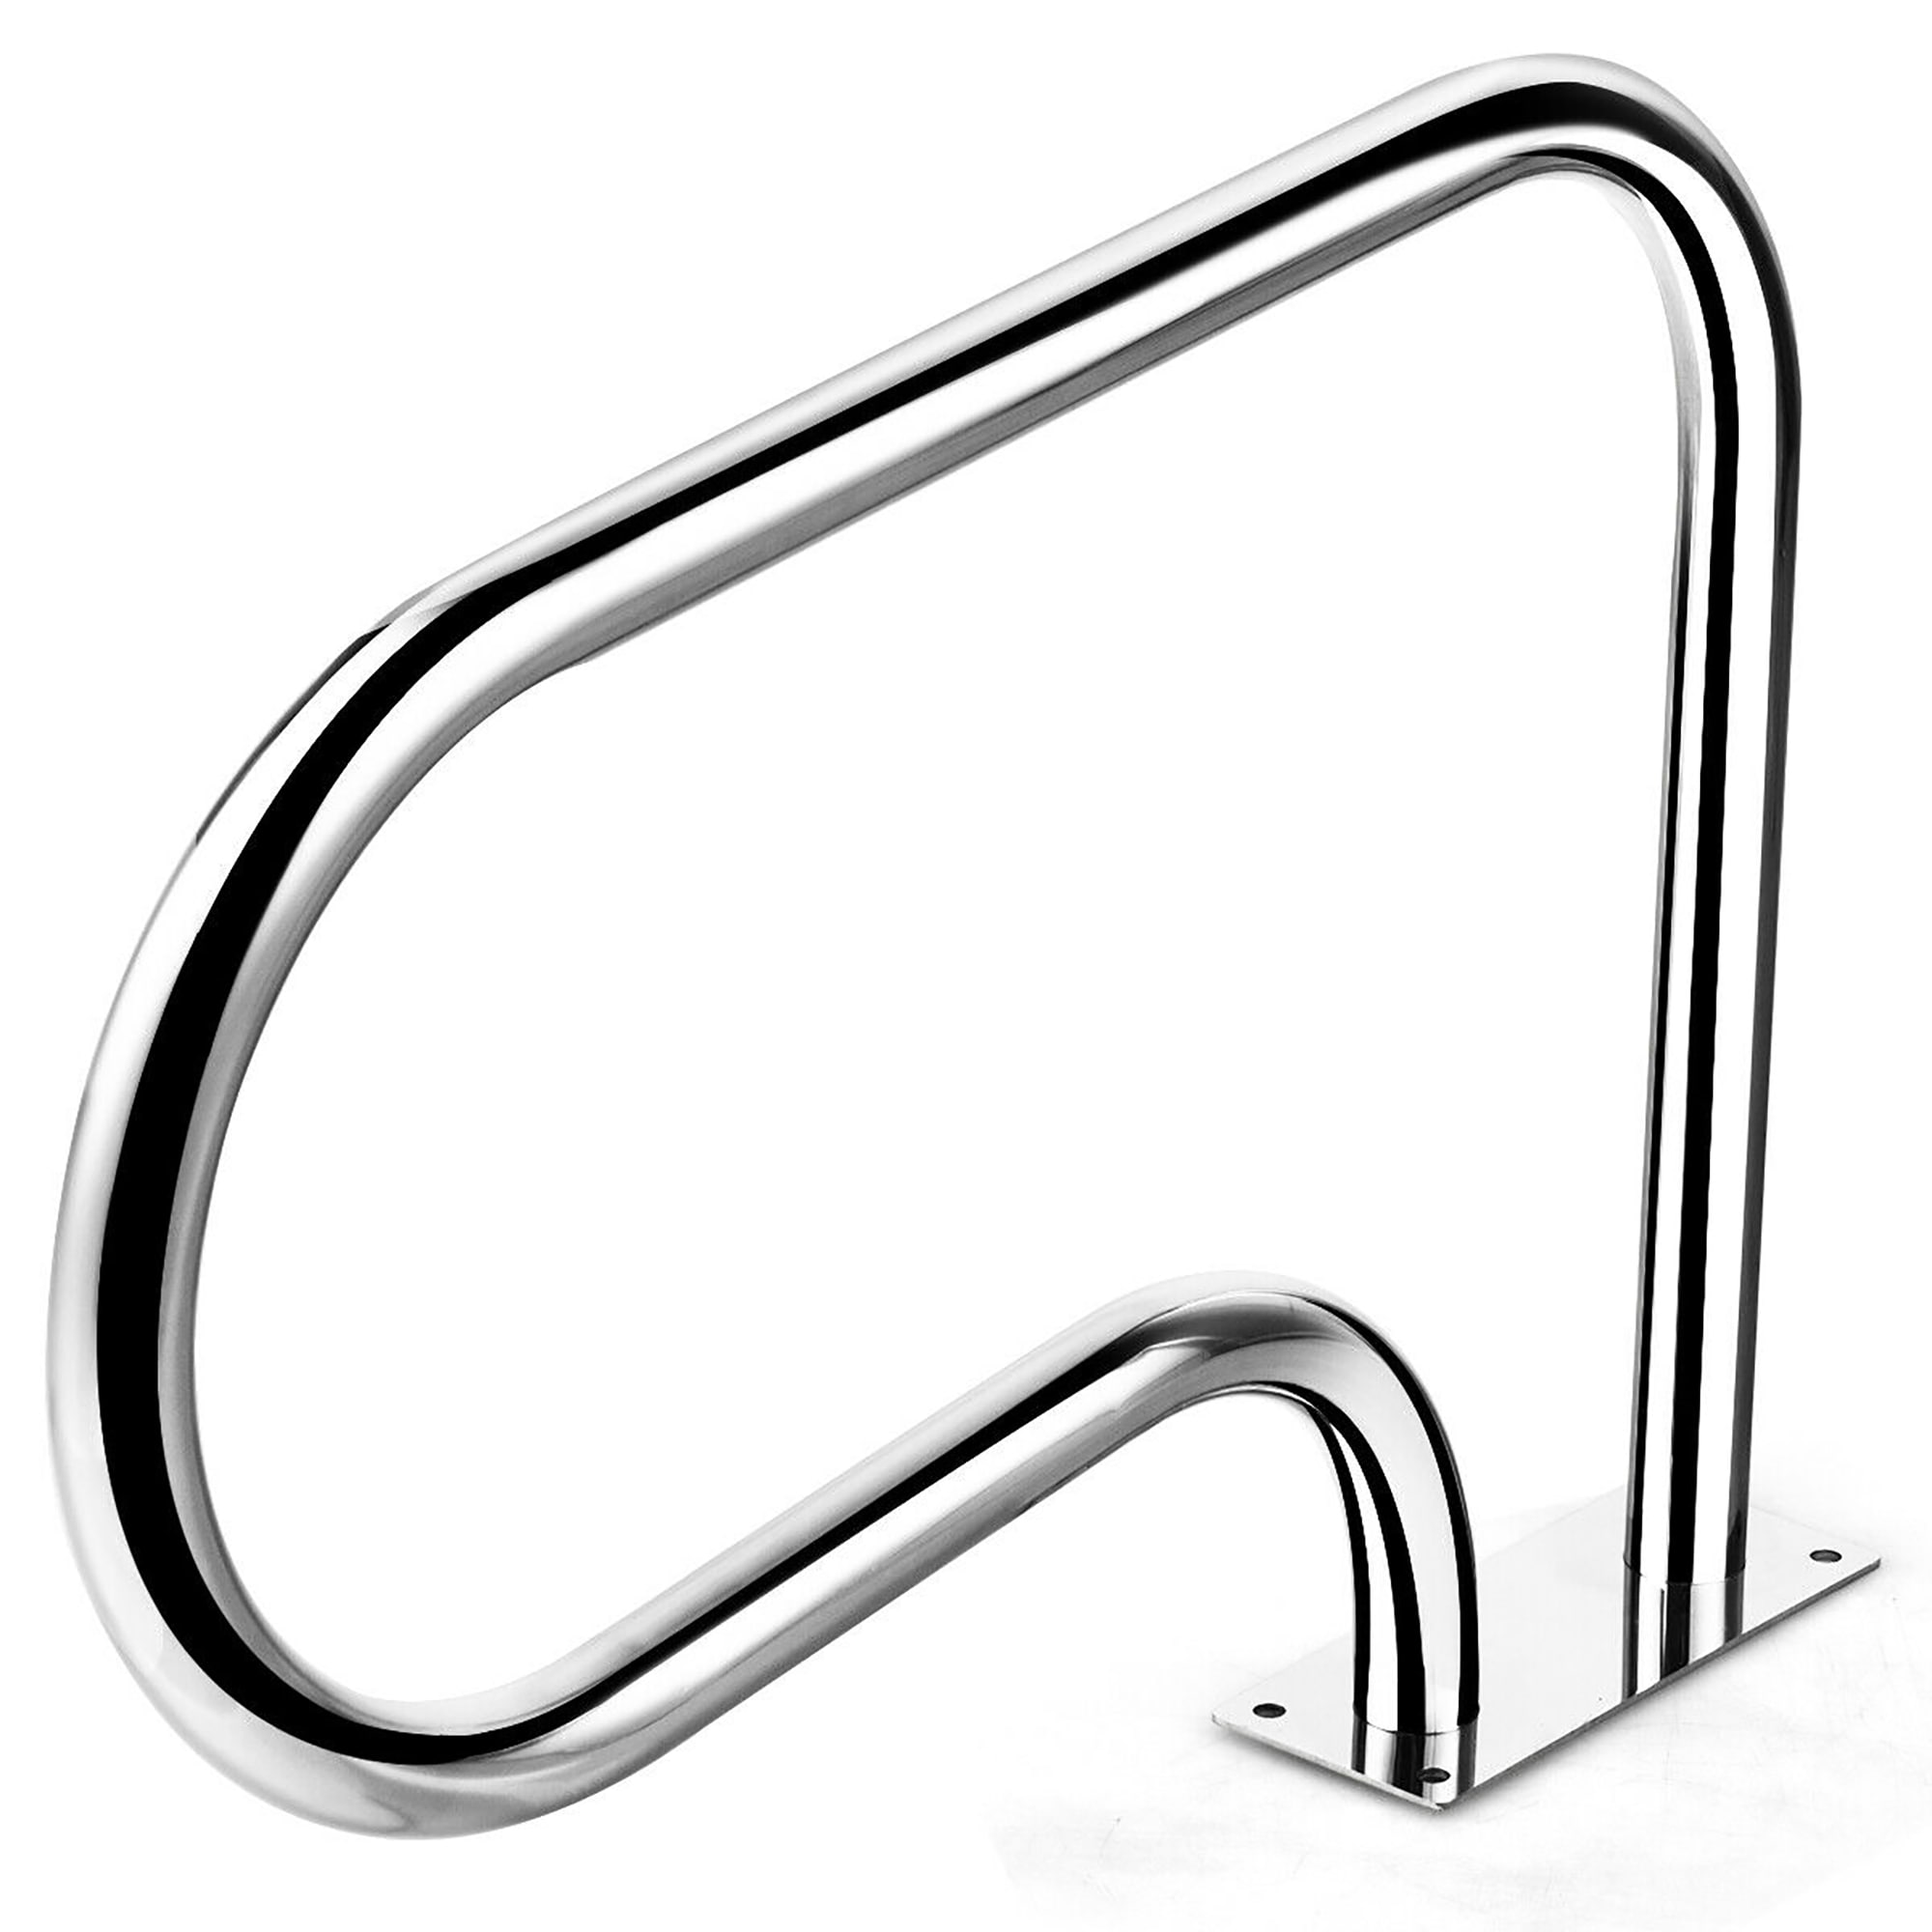 Swimming Pool Hand Rail Stainless Steel with Base Plate Inground Spa Hand rail 